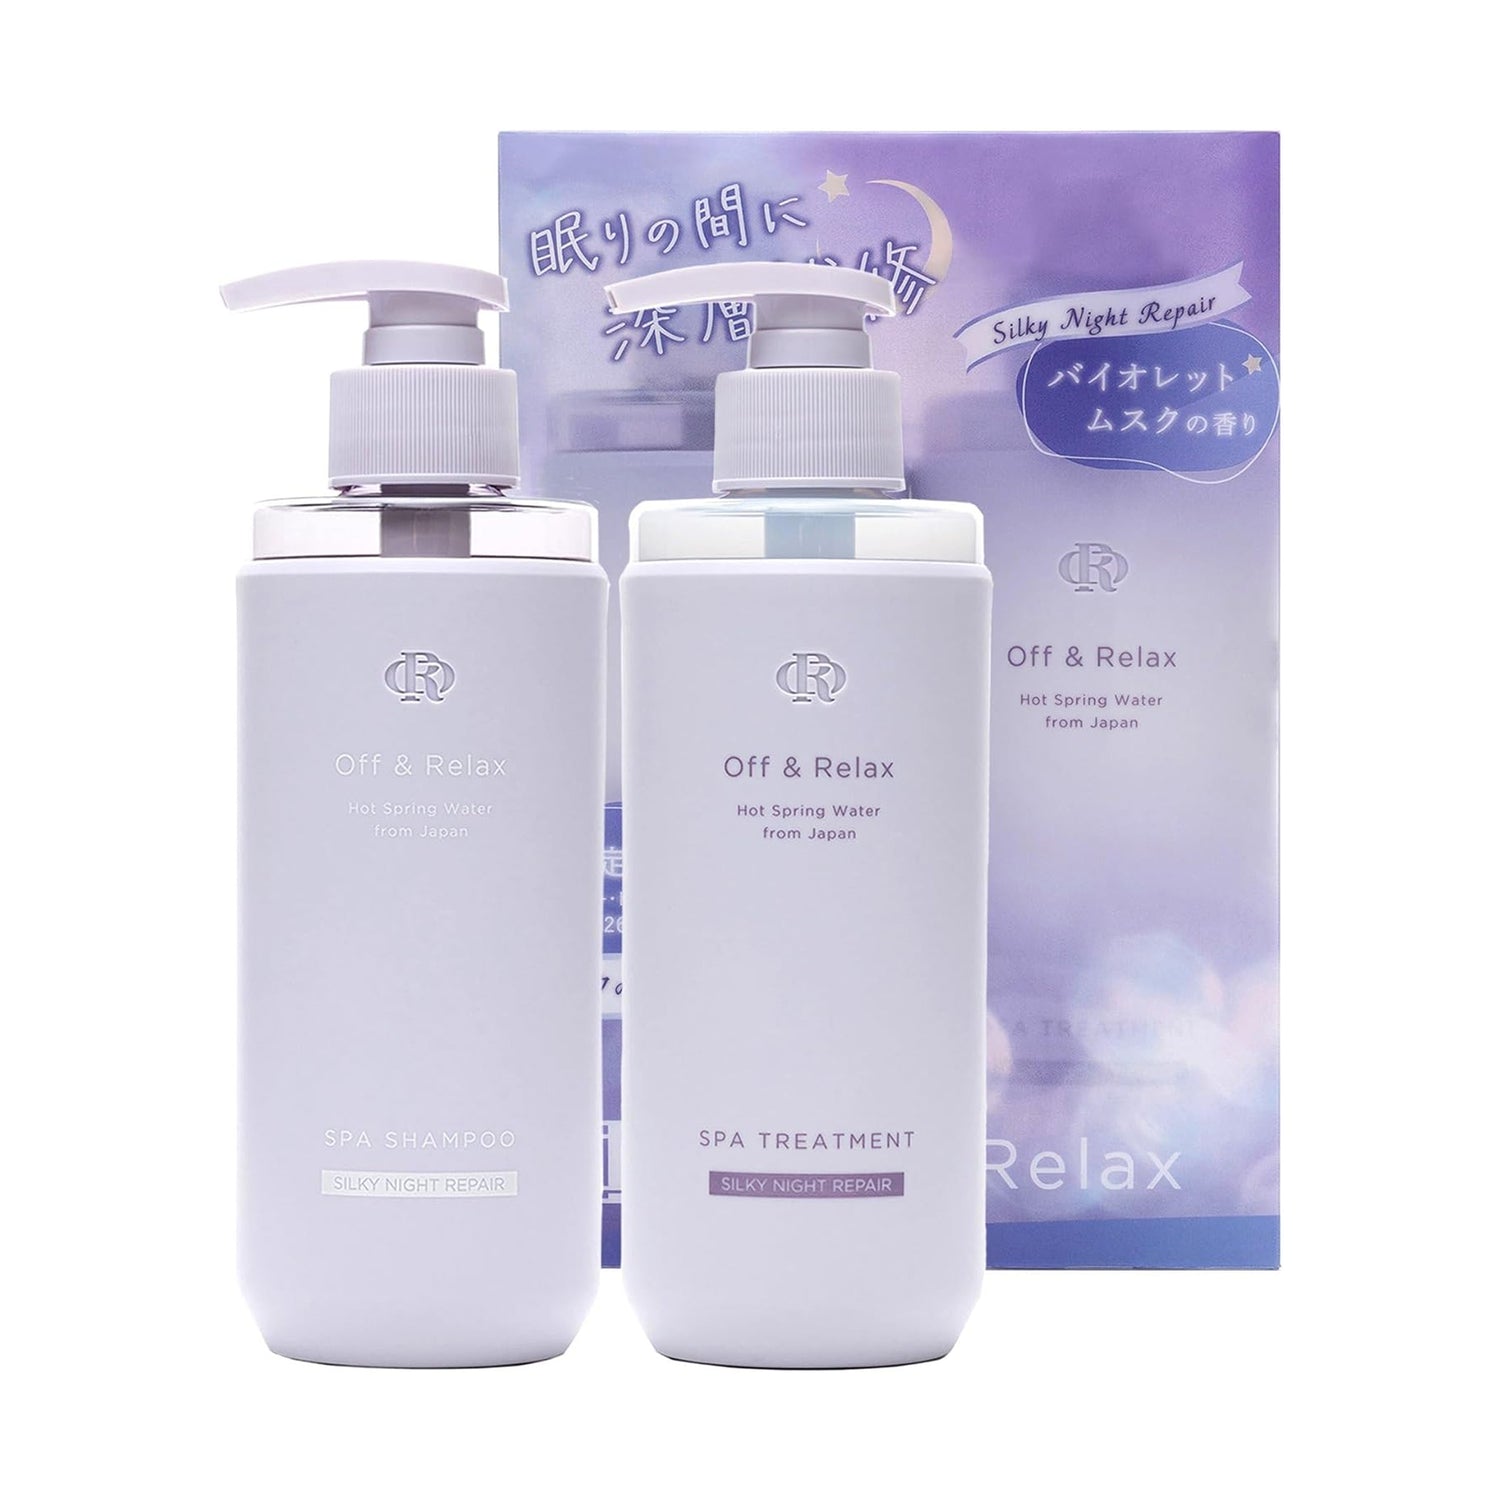 Off &amp; Relax Silky Night Repair Violet Musk Scent Shampoo Limited Set 260ml+260ml